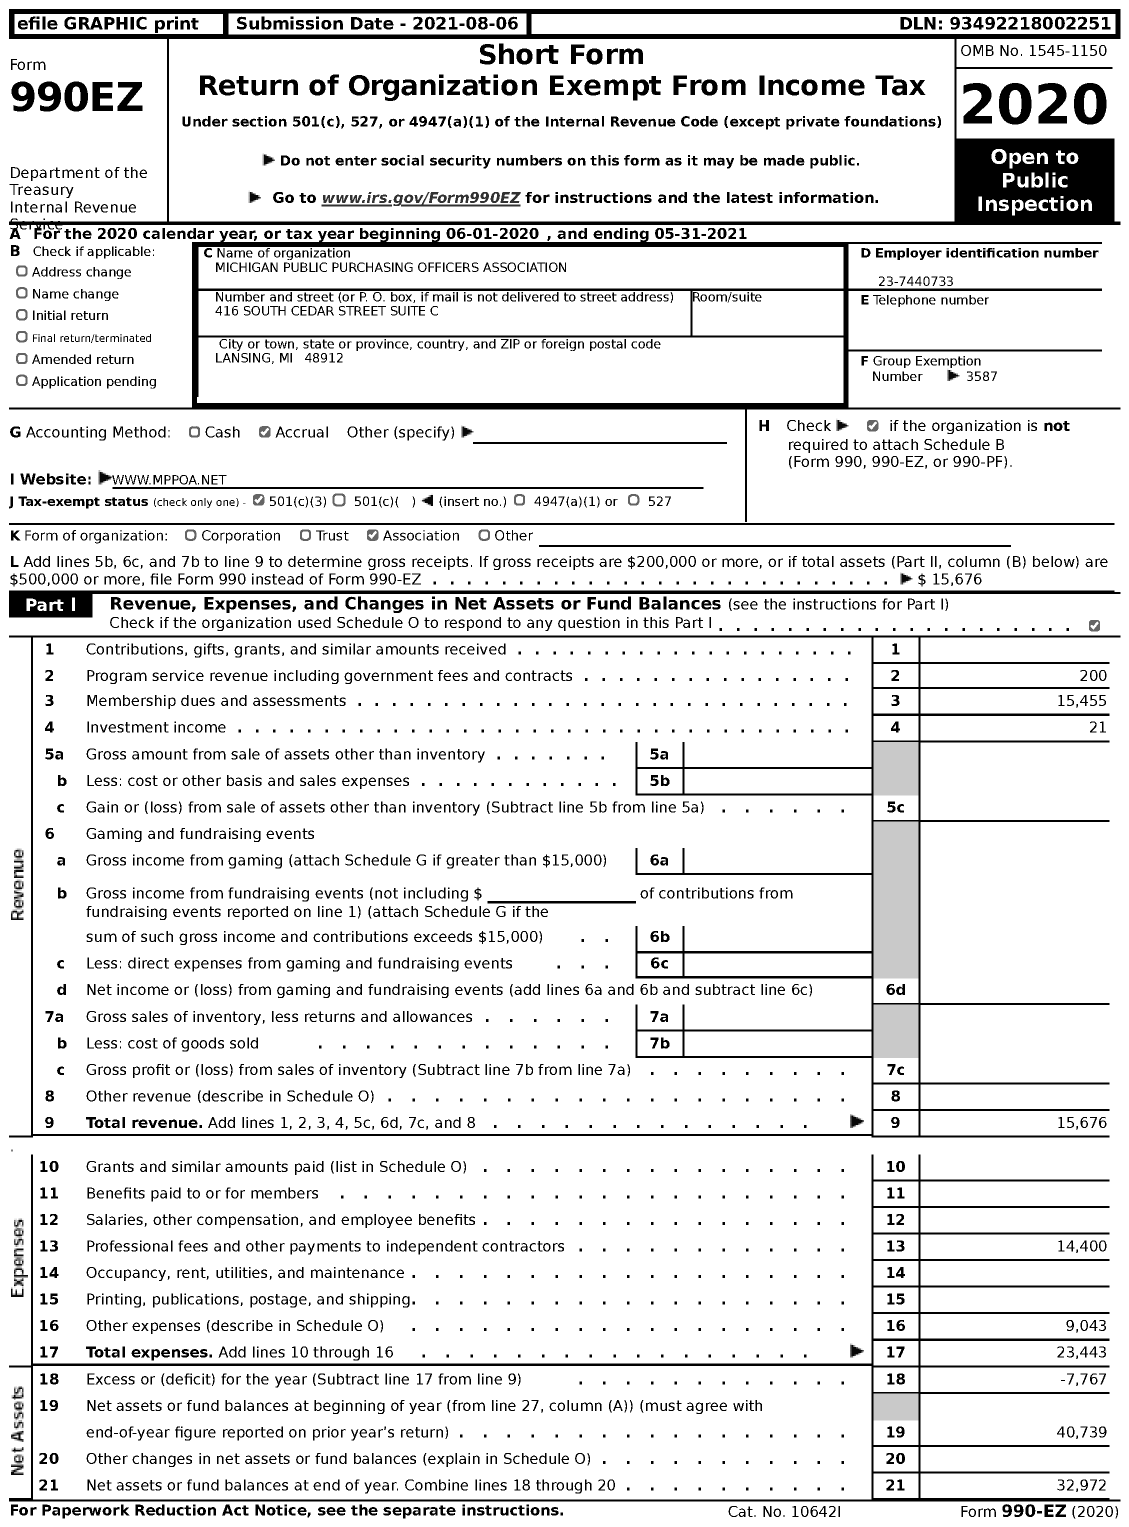 Image of first page of 2020 Form 990EZ for Michigan Public Purchasing Officers Association